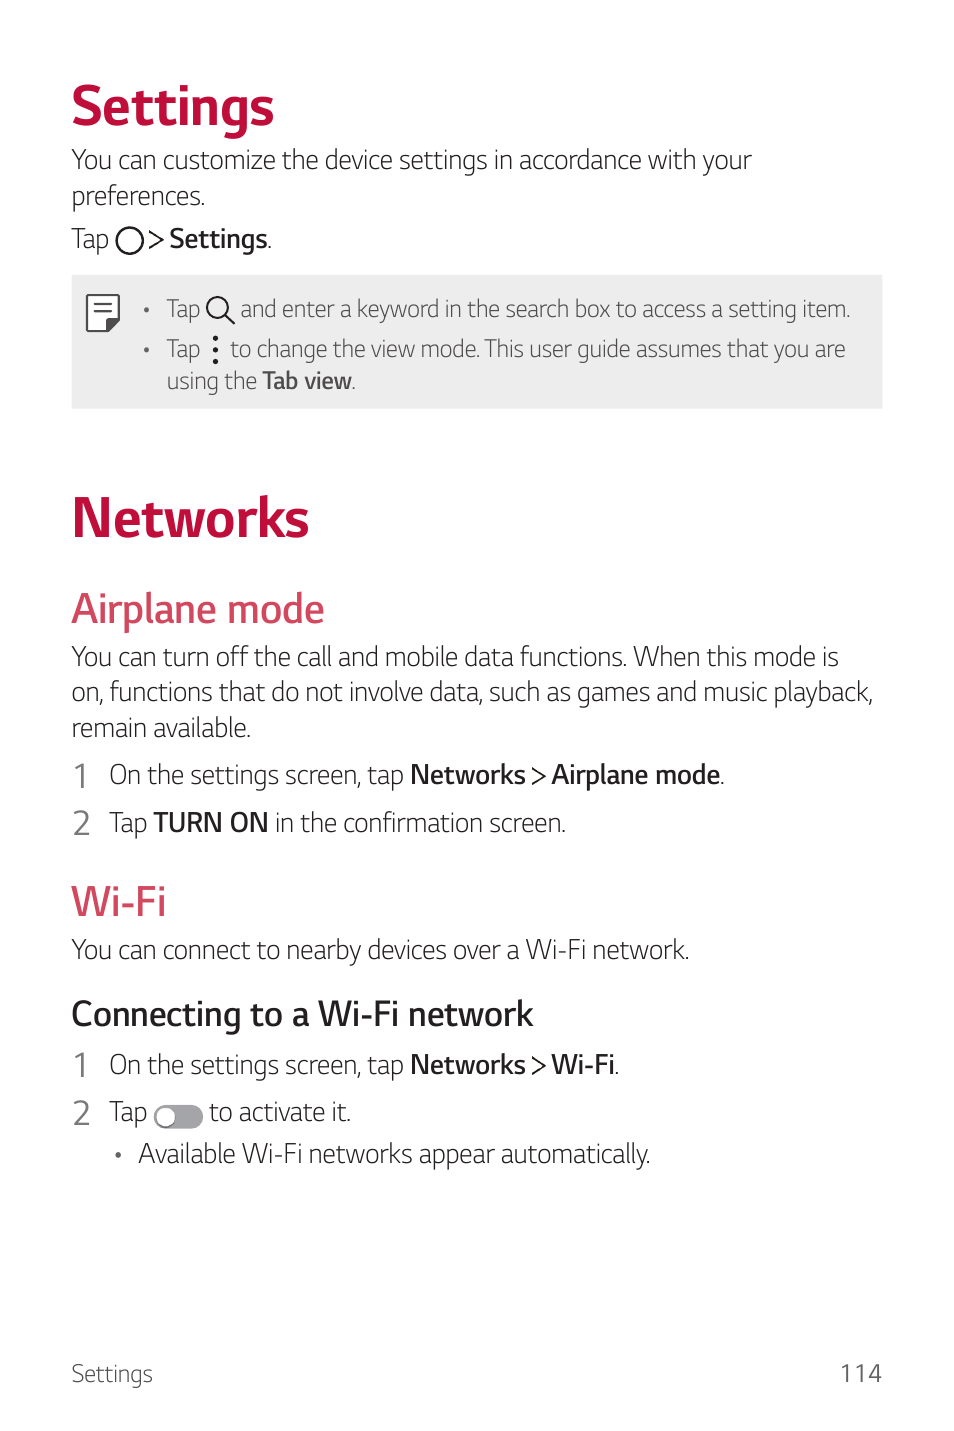 Settings, Networks, Airplane mode | Wi-fi, Connecting to a wi-fi network | LG G6 H872 User Manual | Page 115 / 183